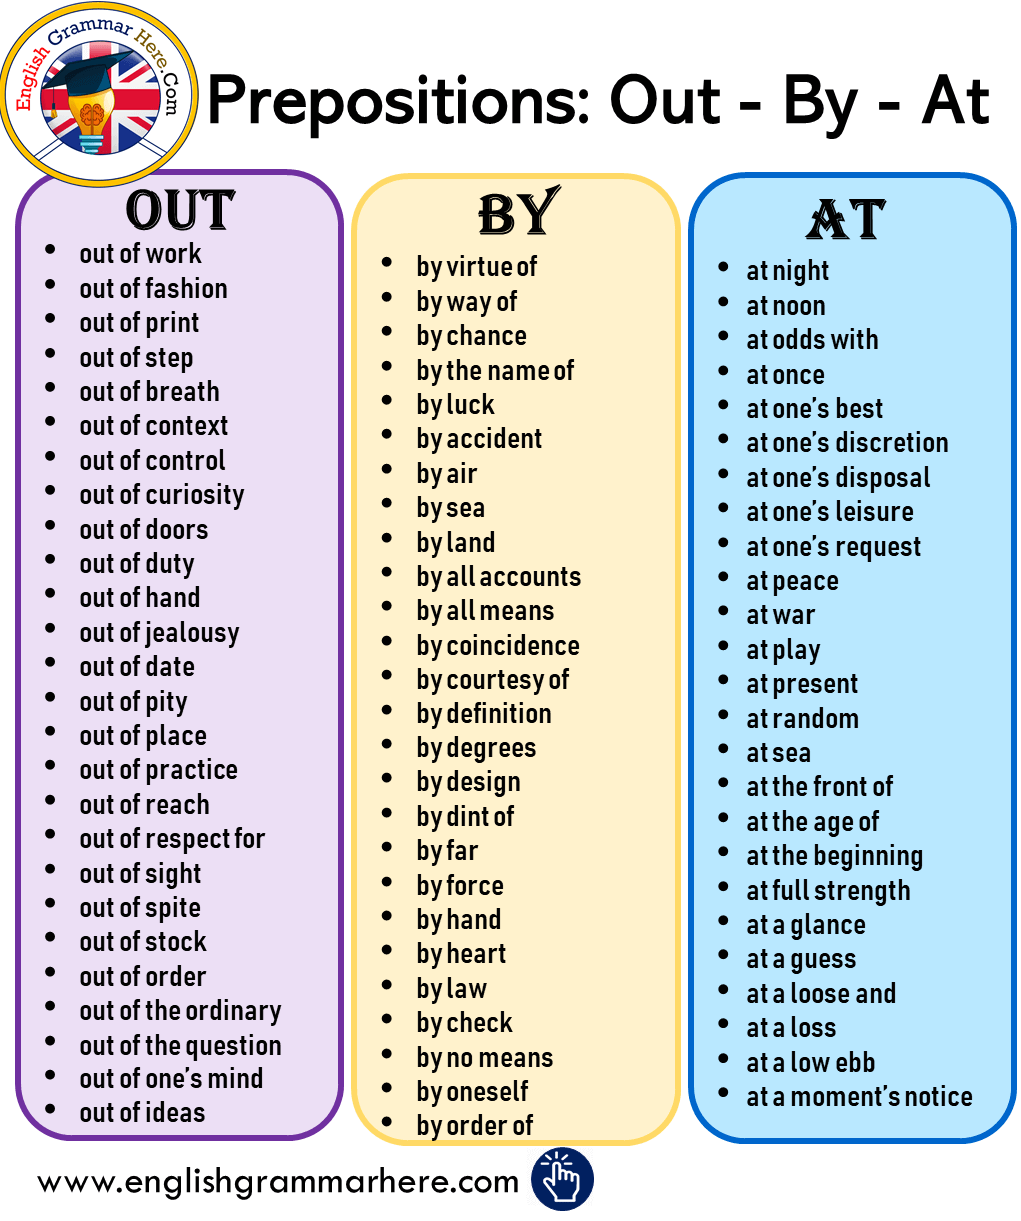 Prepositional Phrases, Out, By, At